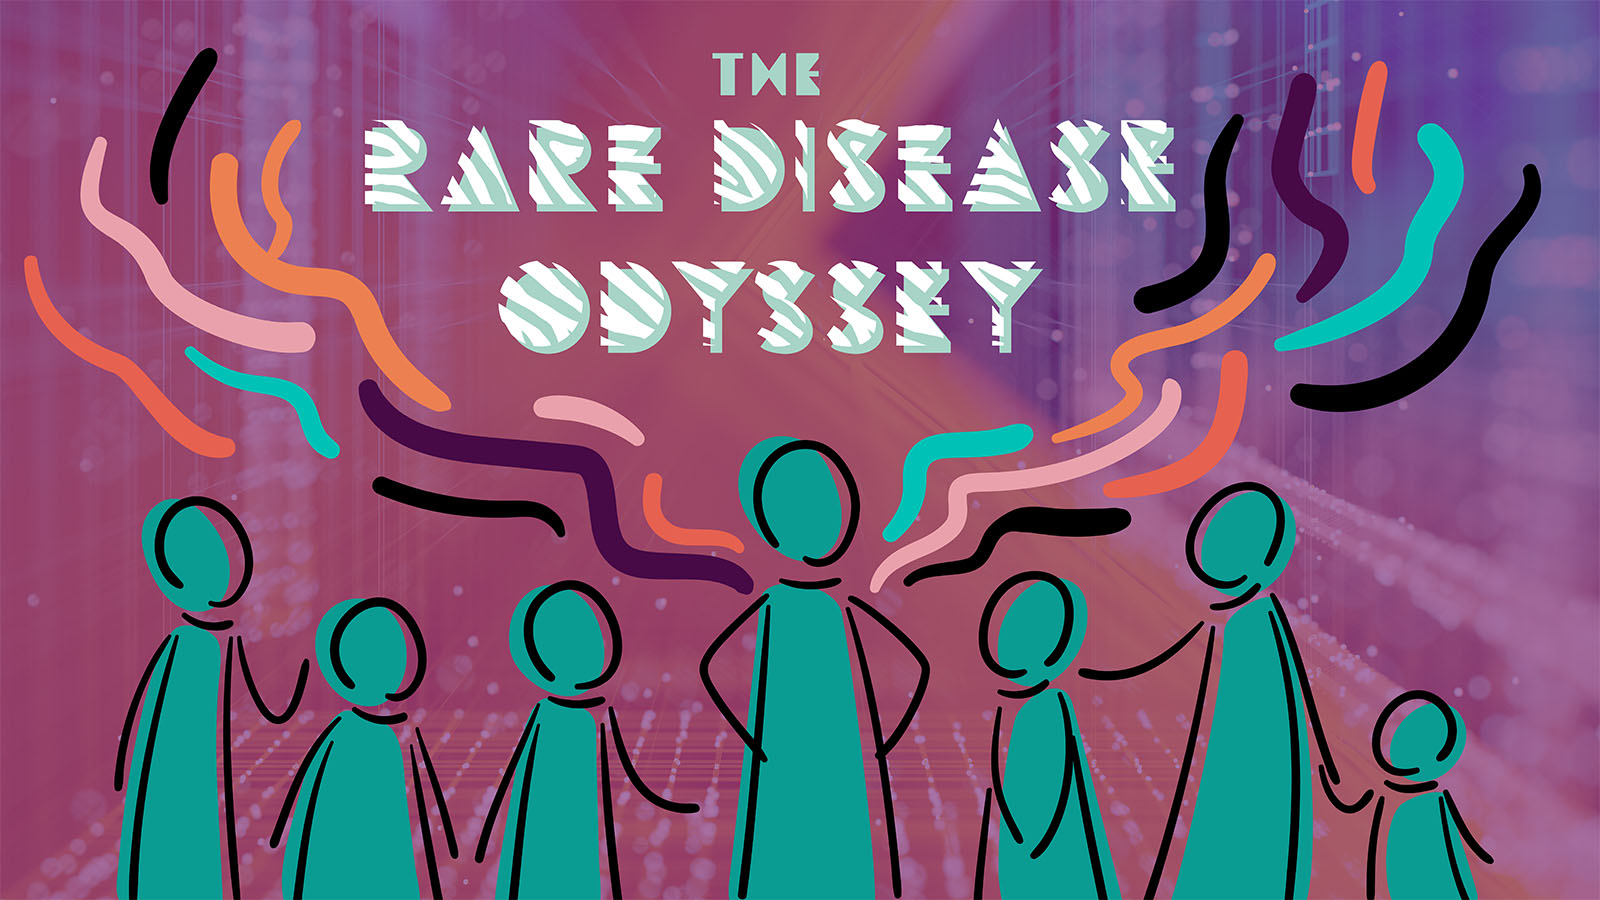 March navigating the rare disease odyssey